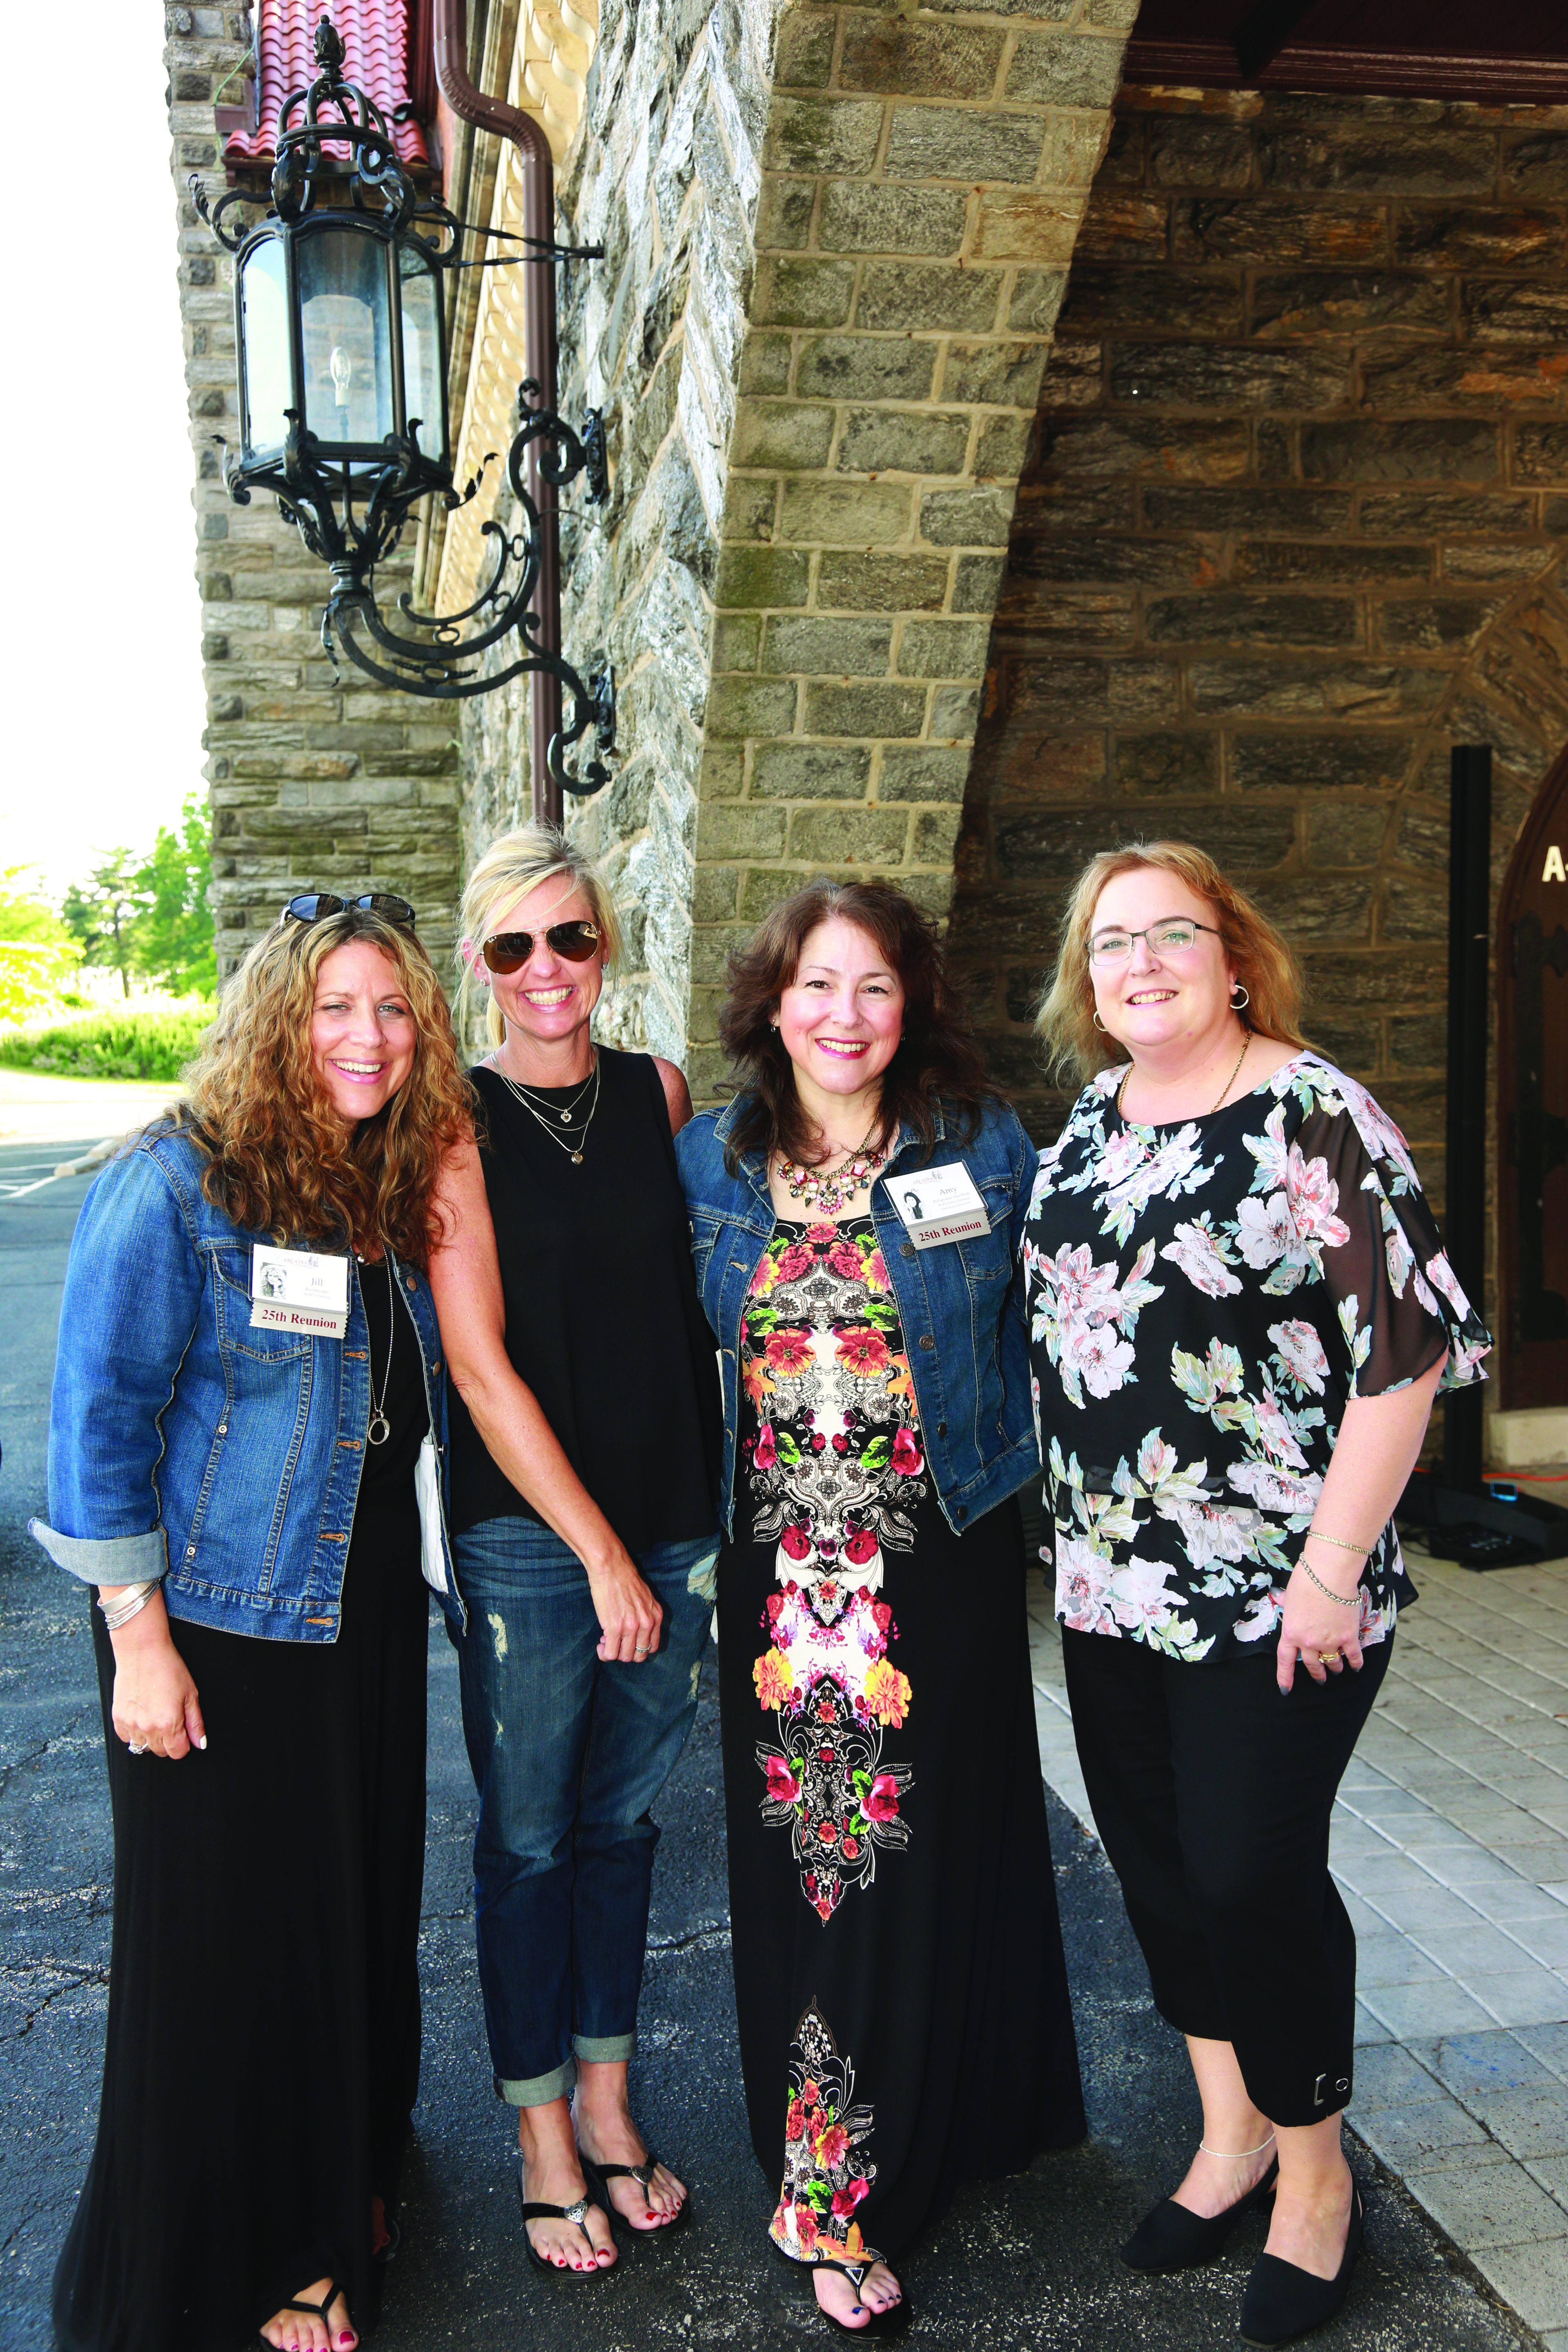 Jill Buchbinder, Suzi Beaver Meanor, Amy Richardson MacMath, and Marianne King Pedicone posing together and representing Class of 1990.